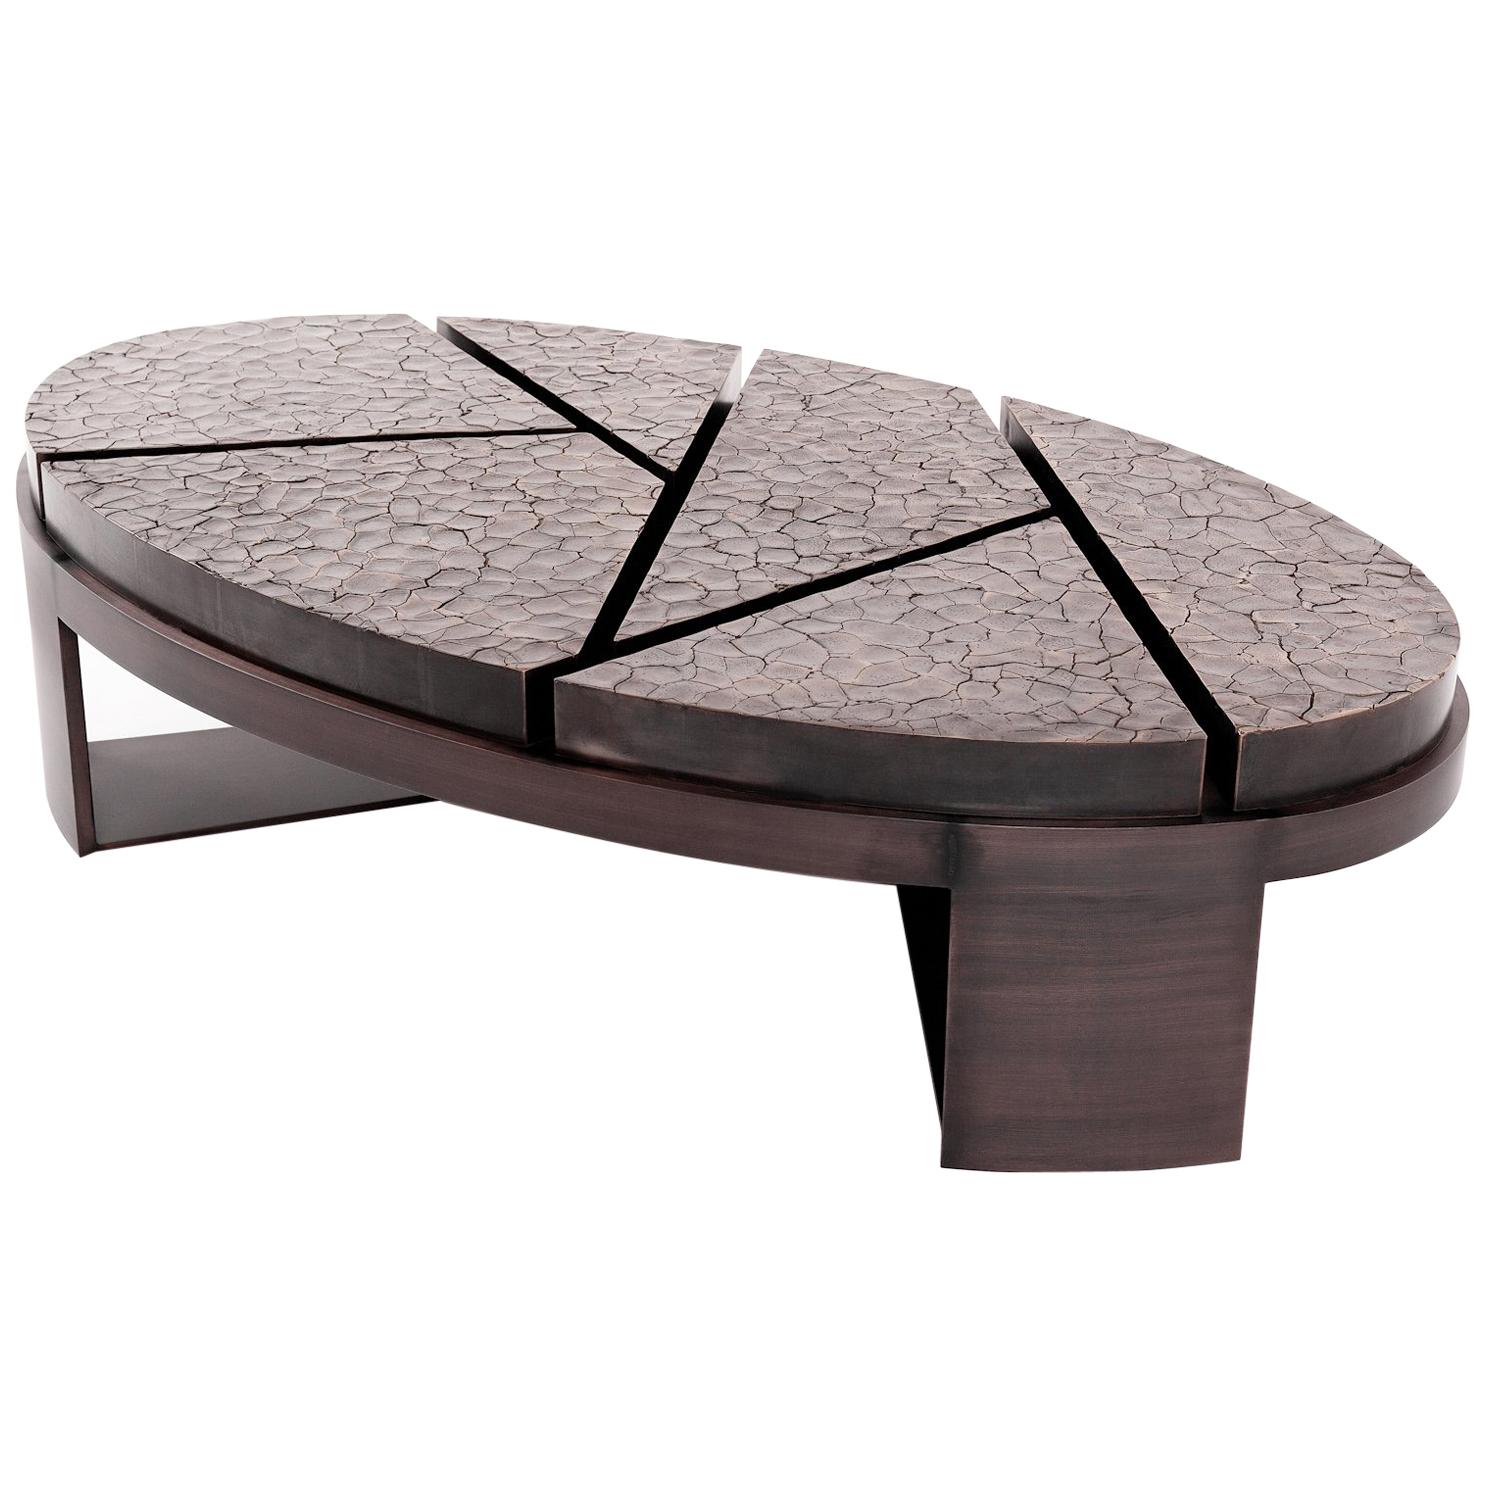 Aurora Coffee Table - Cracked Earth - Size I For Sale